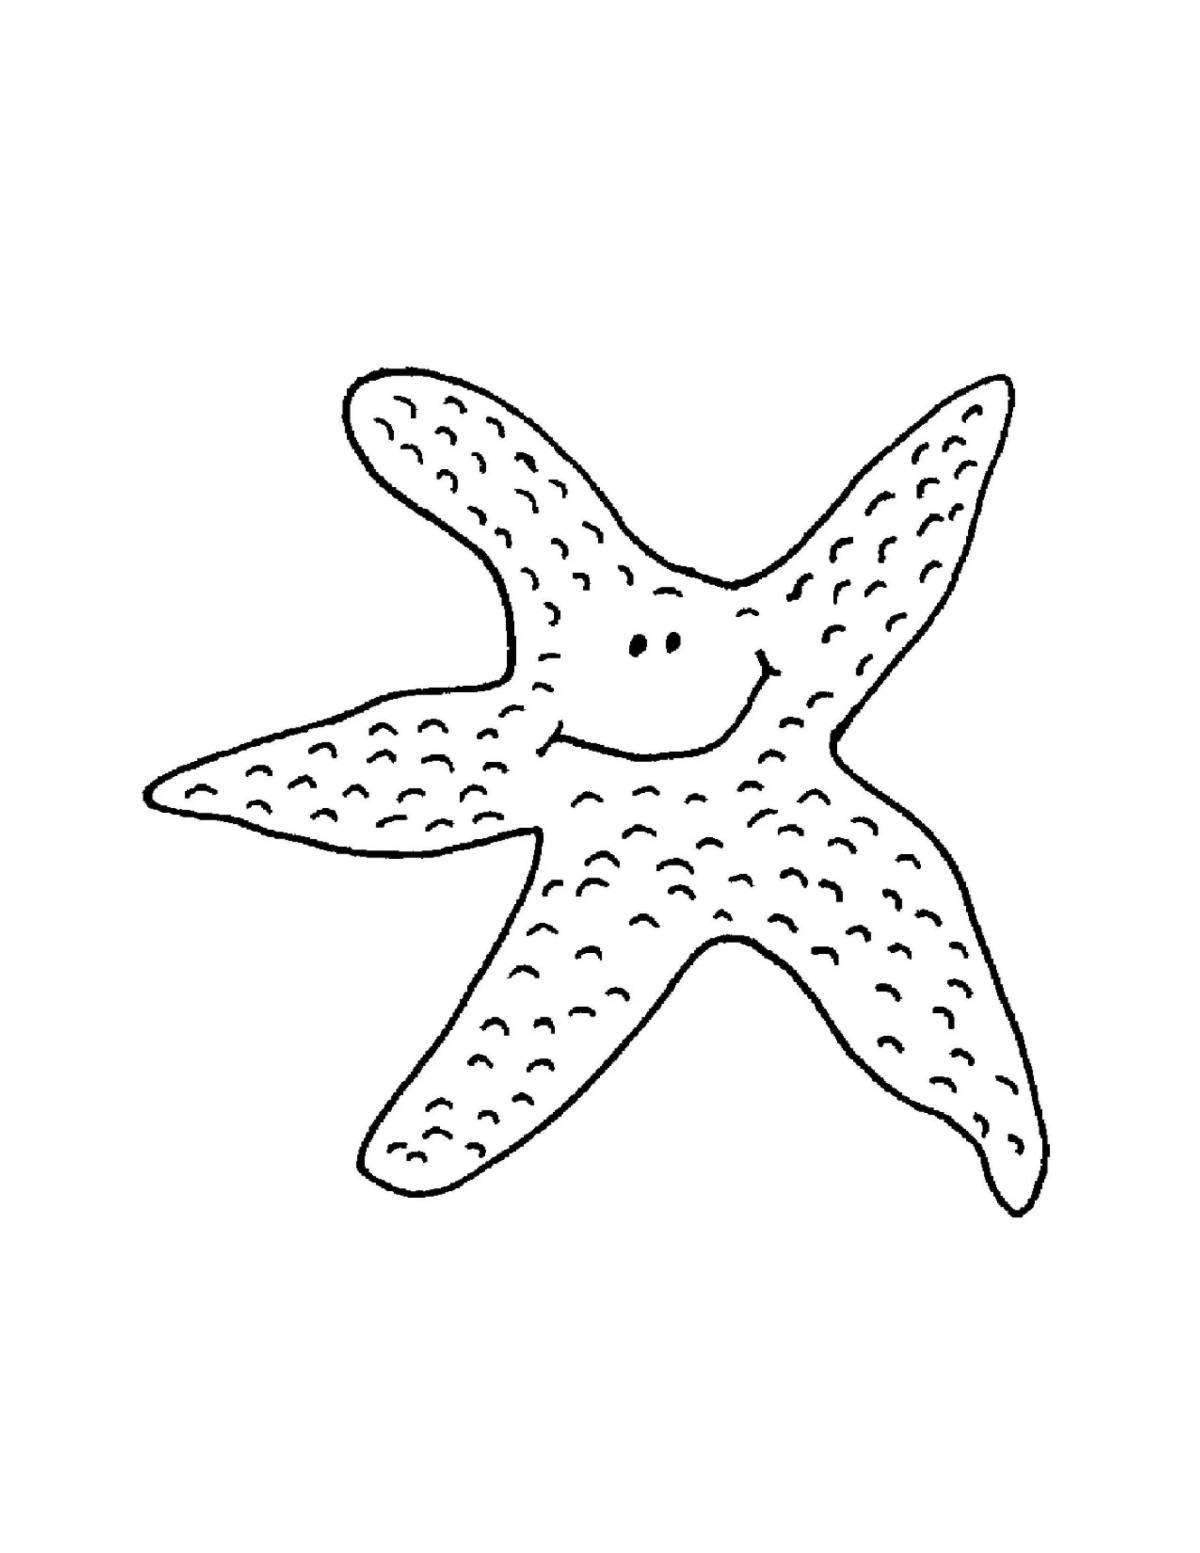 Outstanding starfish coloring book for kids